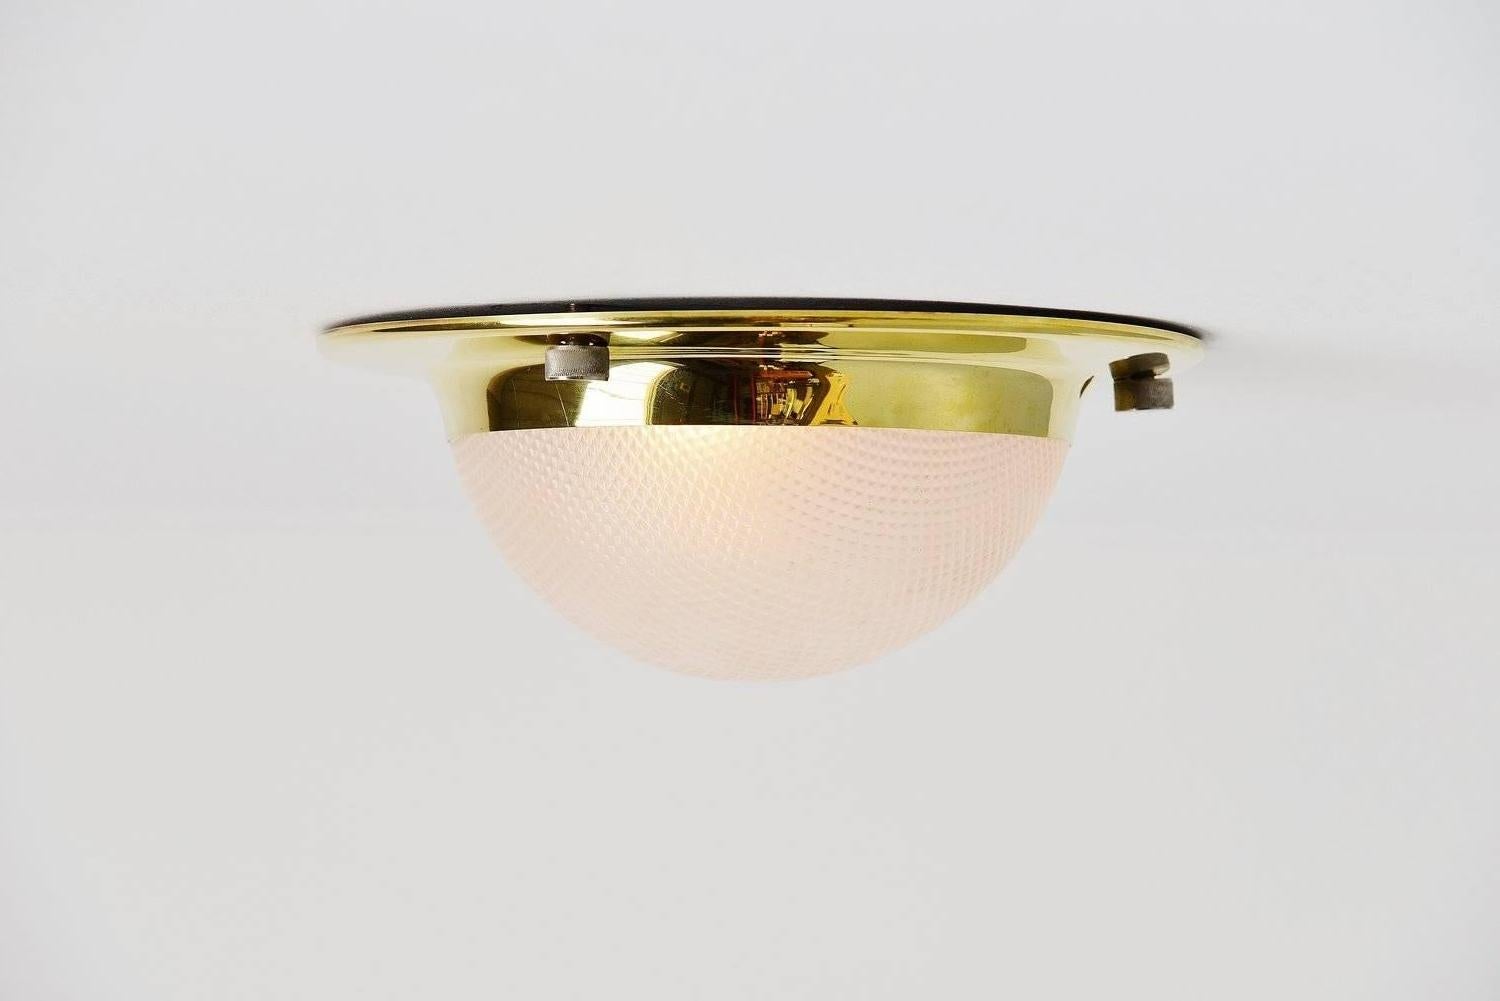 Mid-Century Modern Luigi Caccia Dominioni for Azucena Tommy LSP6 Lamp, Italy, 1965 For Sale